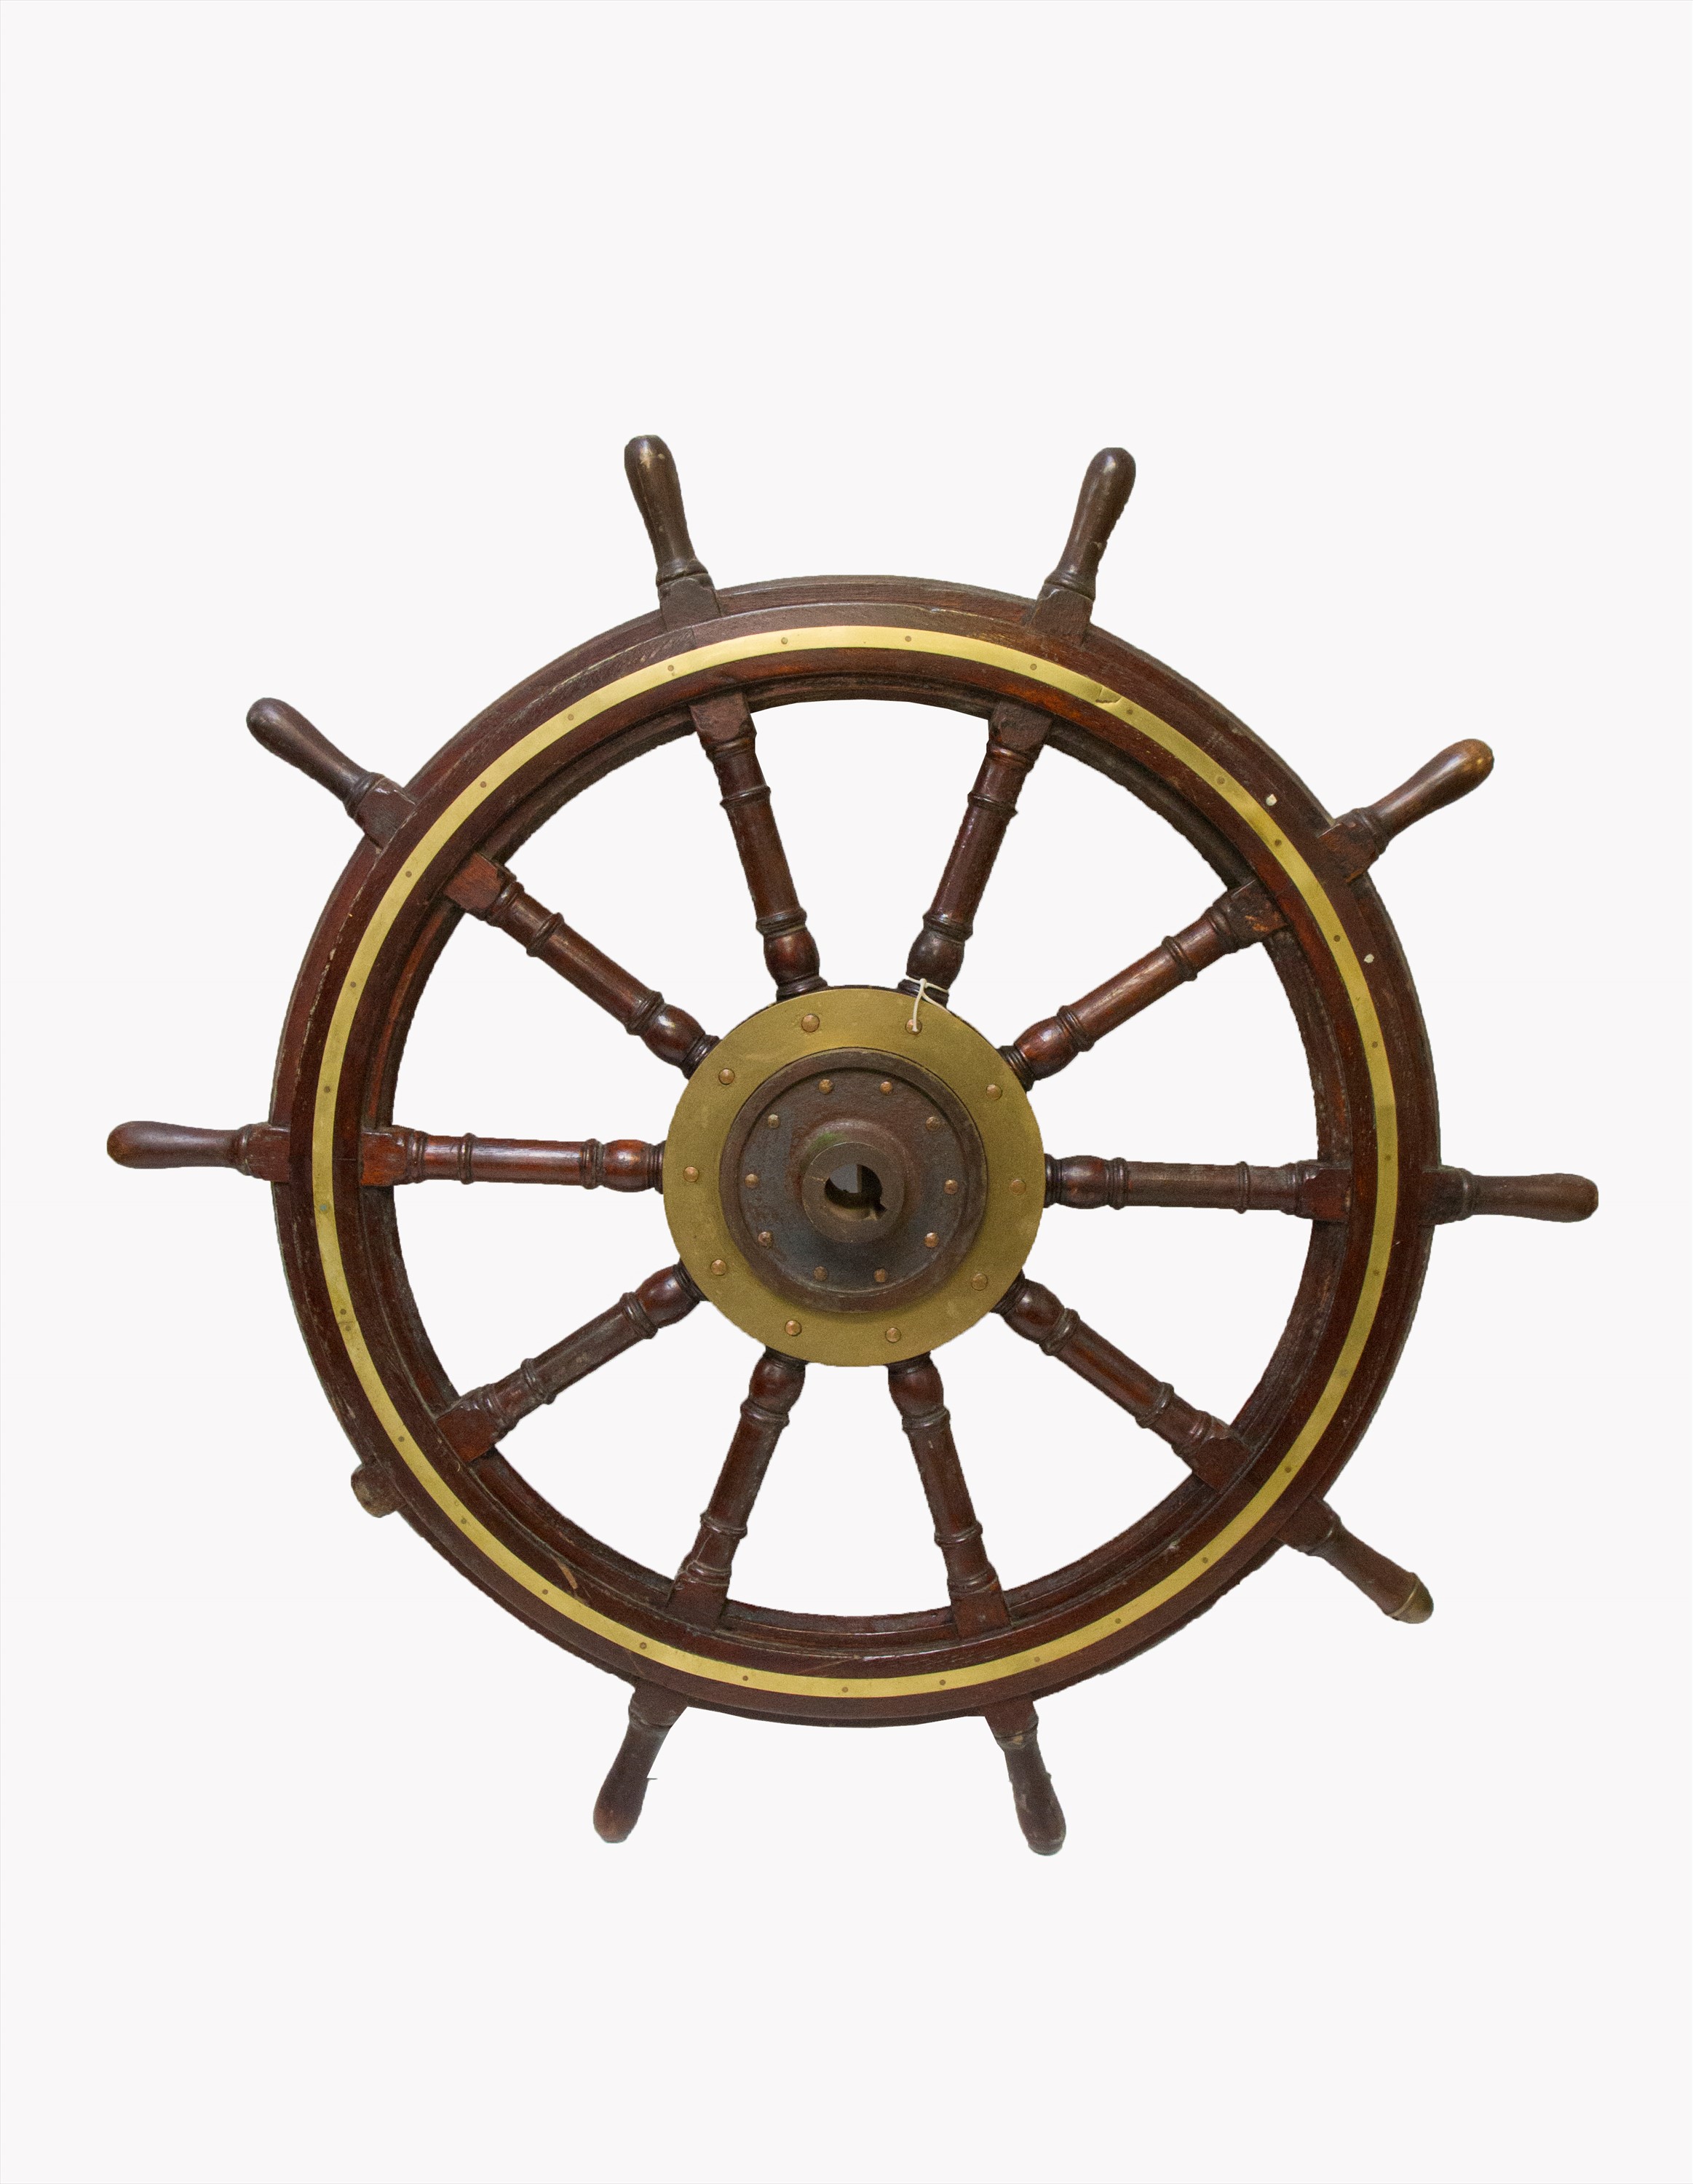 A 19th century hardwood brass mounted ship's wheel, the ten spokes with turned ends (one